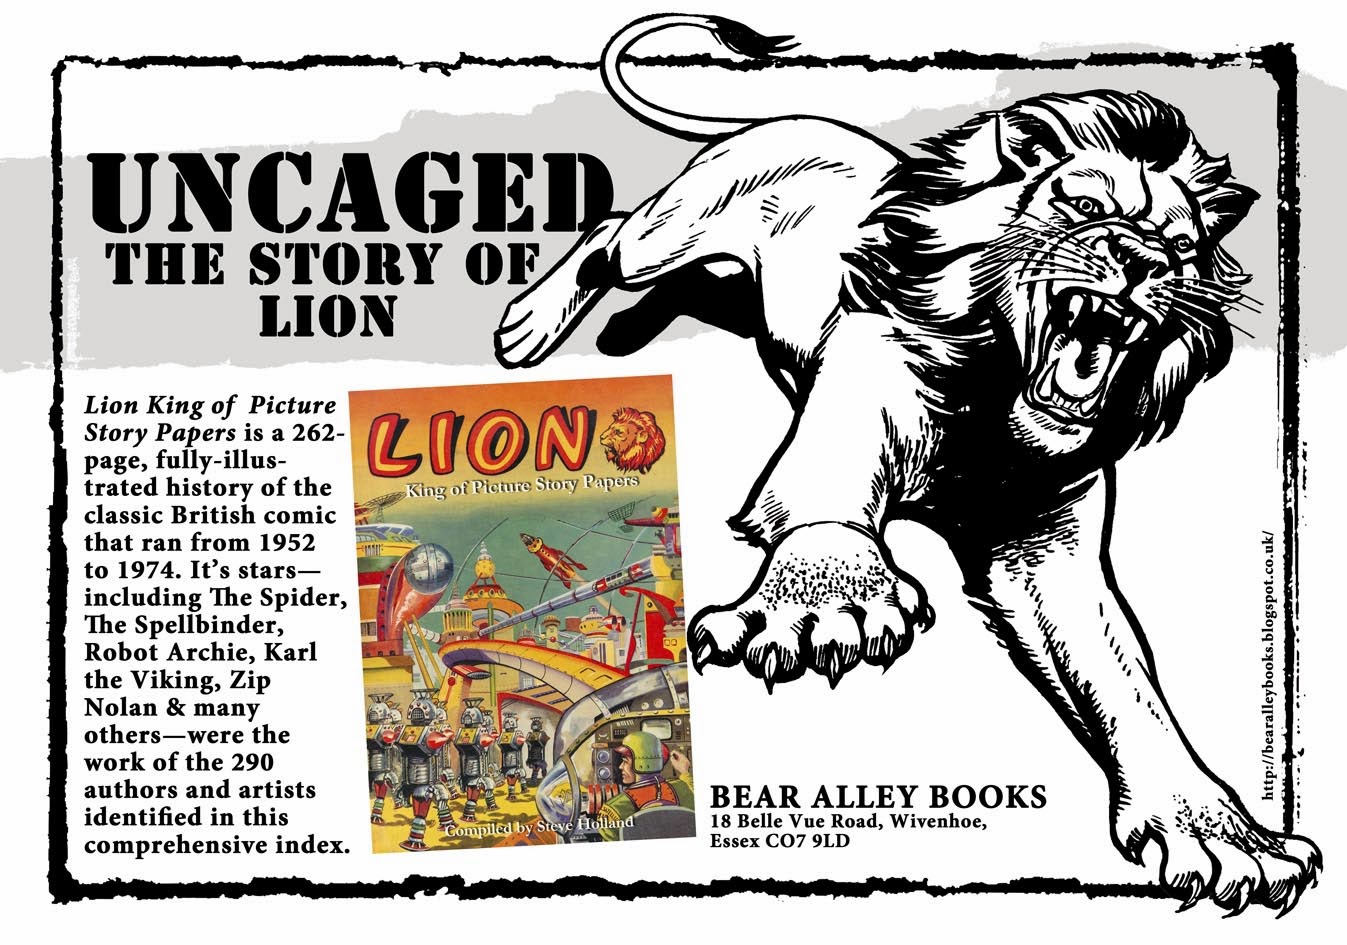 http://bearalleybooks.blogspot.co.uk/2013/01/lion-king-of-picture-story-papers_3.html